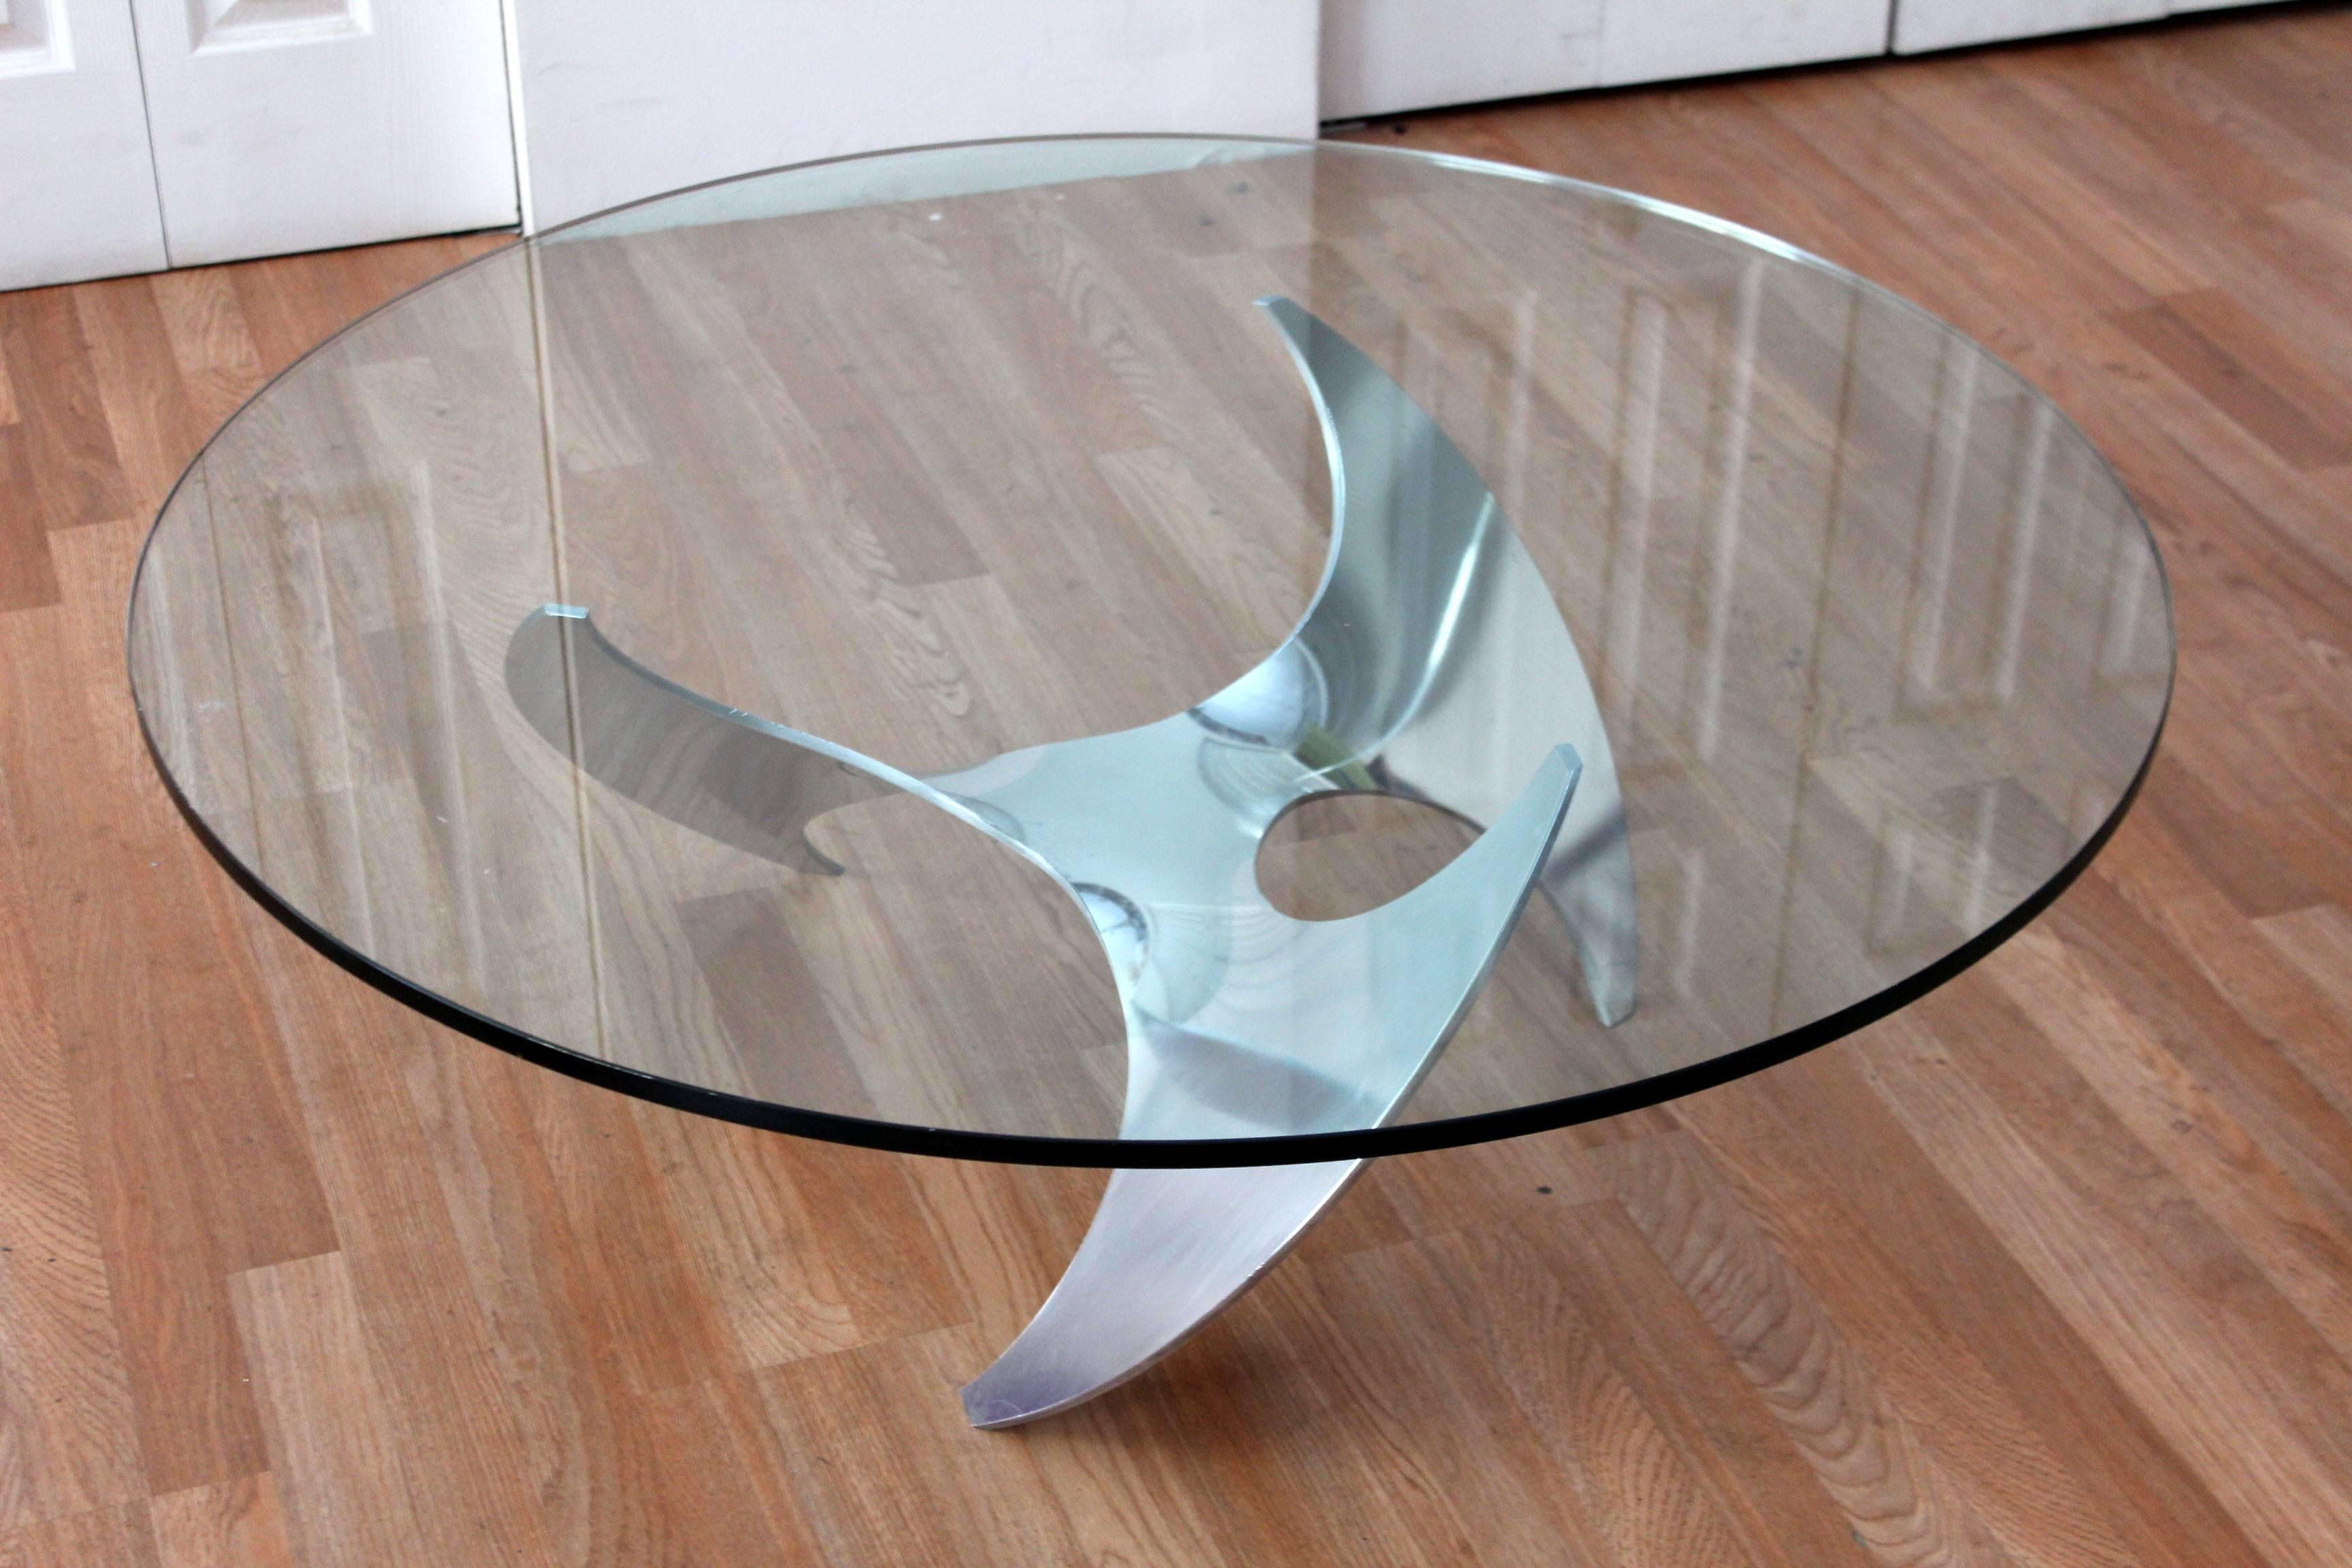 Coffee or cocktail table by Knut Hesterberg. The aluminum base sits in the form of a propeller and the top boasts a 2 inch thick glass top. This piece is perfect for adding a pop of interest to an otherwise heavy room.

Please remember to click